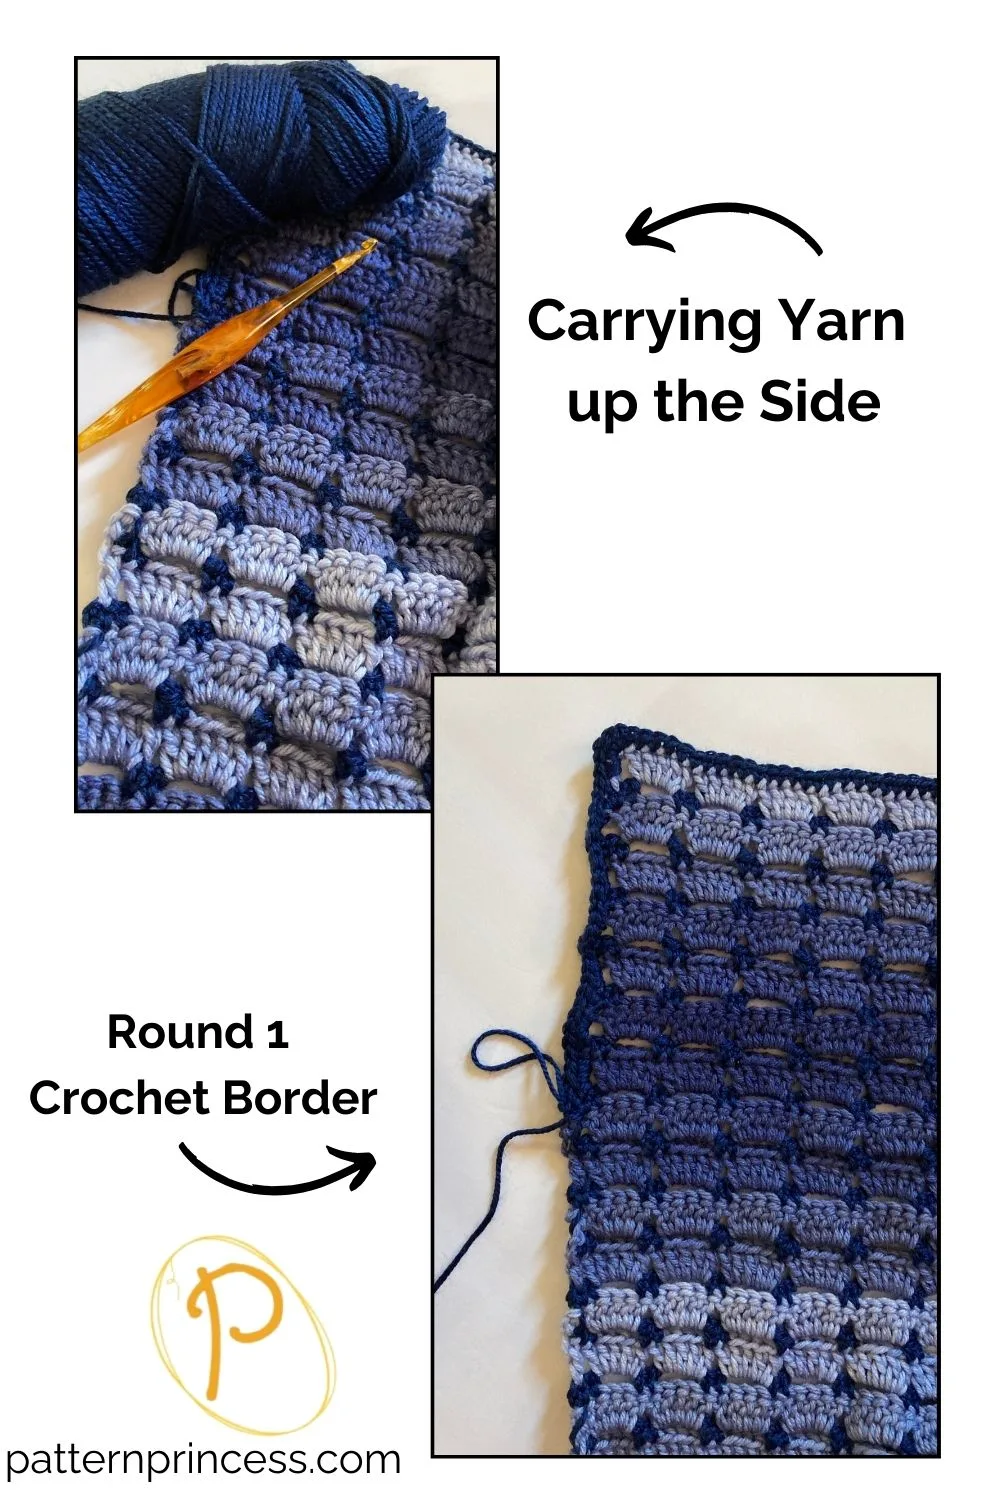 Carrying Yarn up the Side and Round 1 Crochet Border